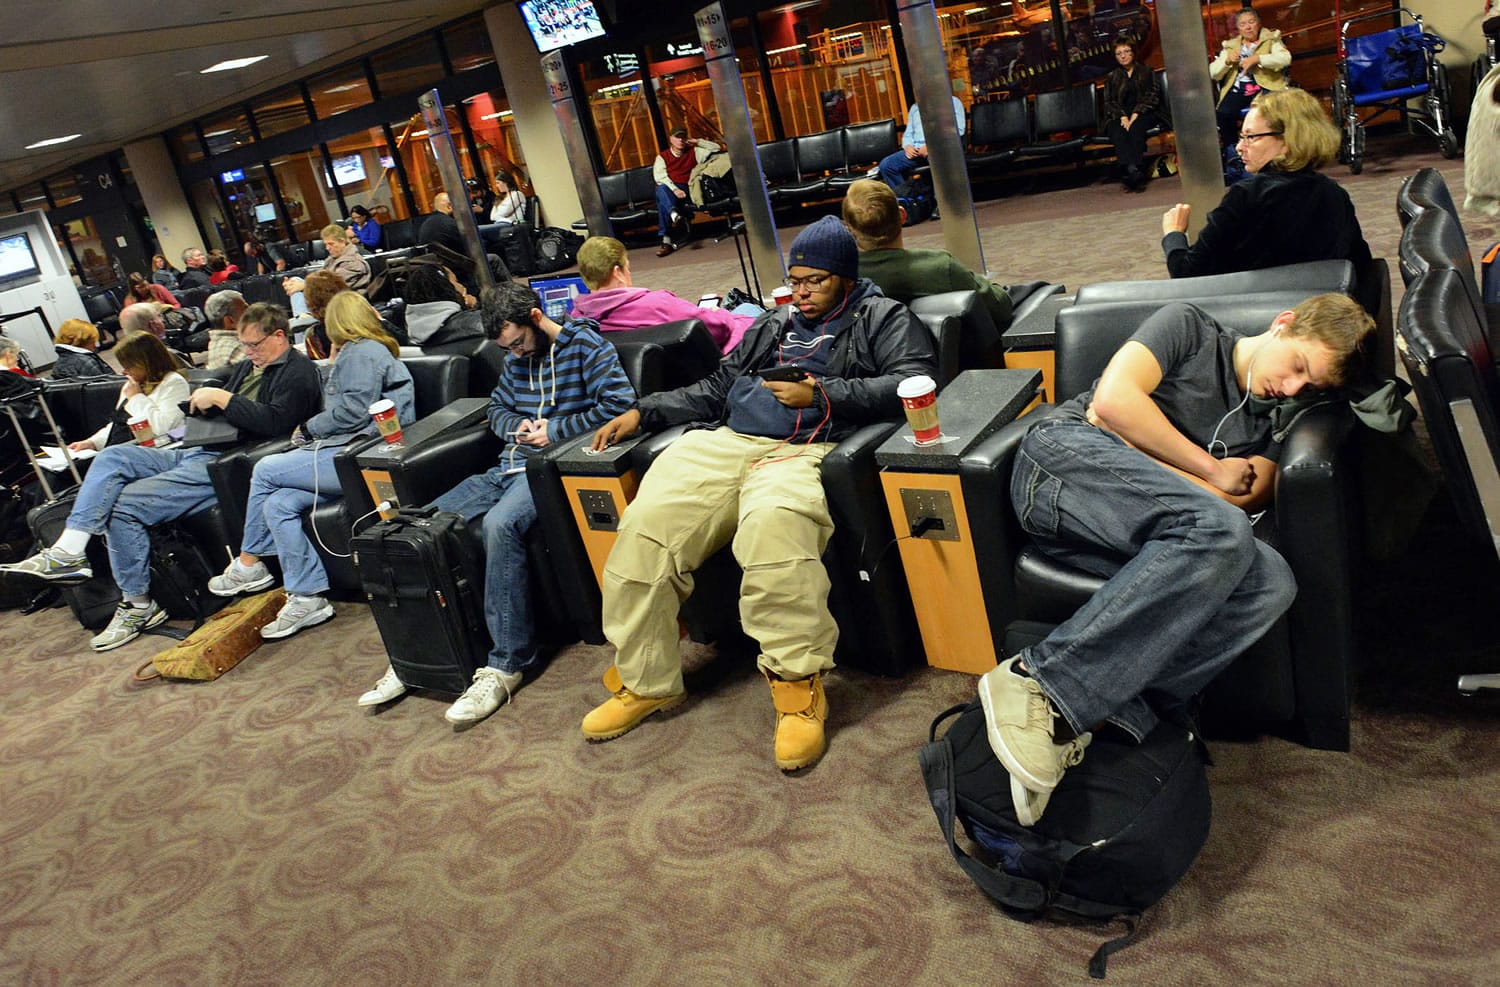 Travelers wait for a flight at a terminal gate at Phoenix Sky Harbor Airport in Phoenix on Tuesday morning.